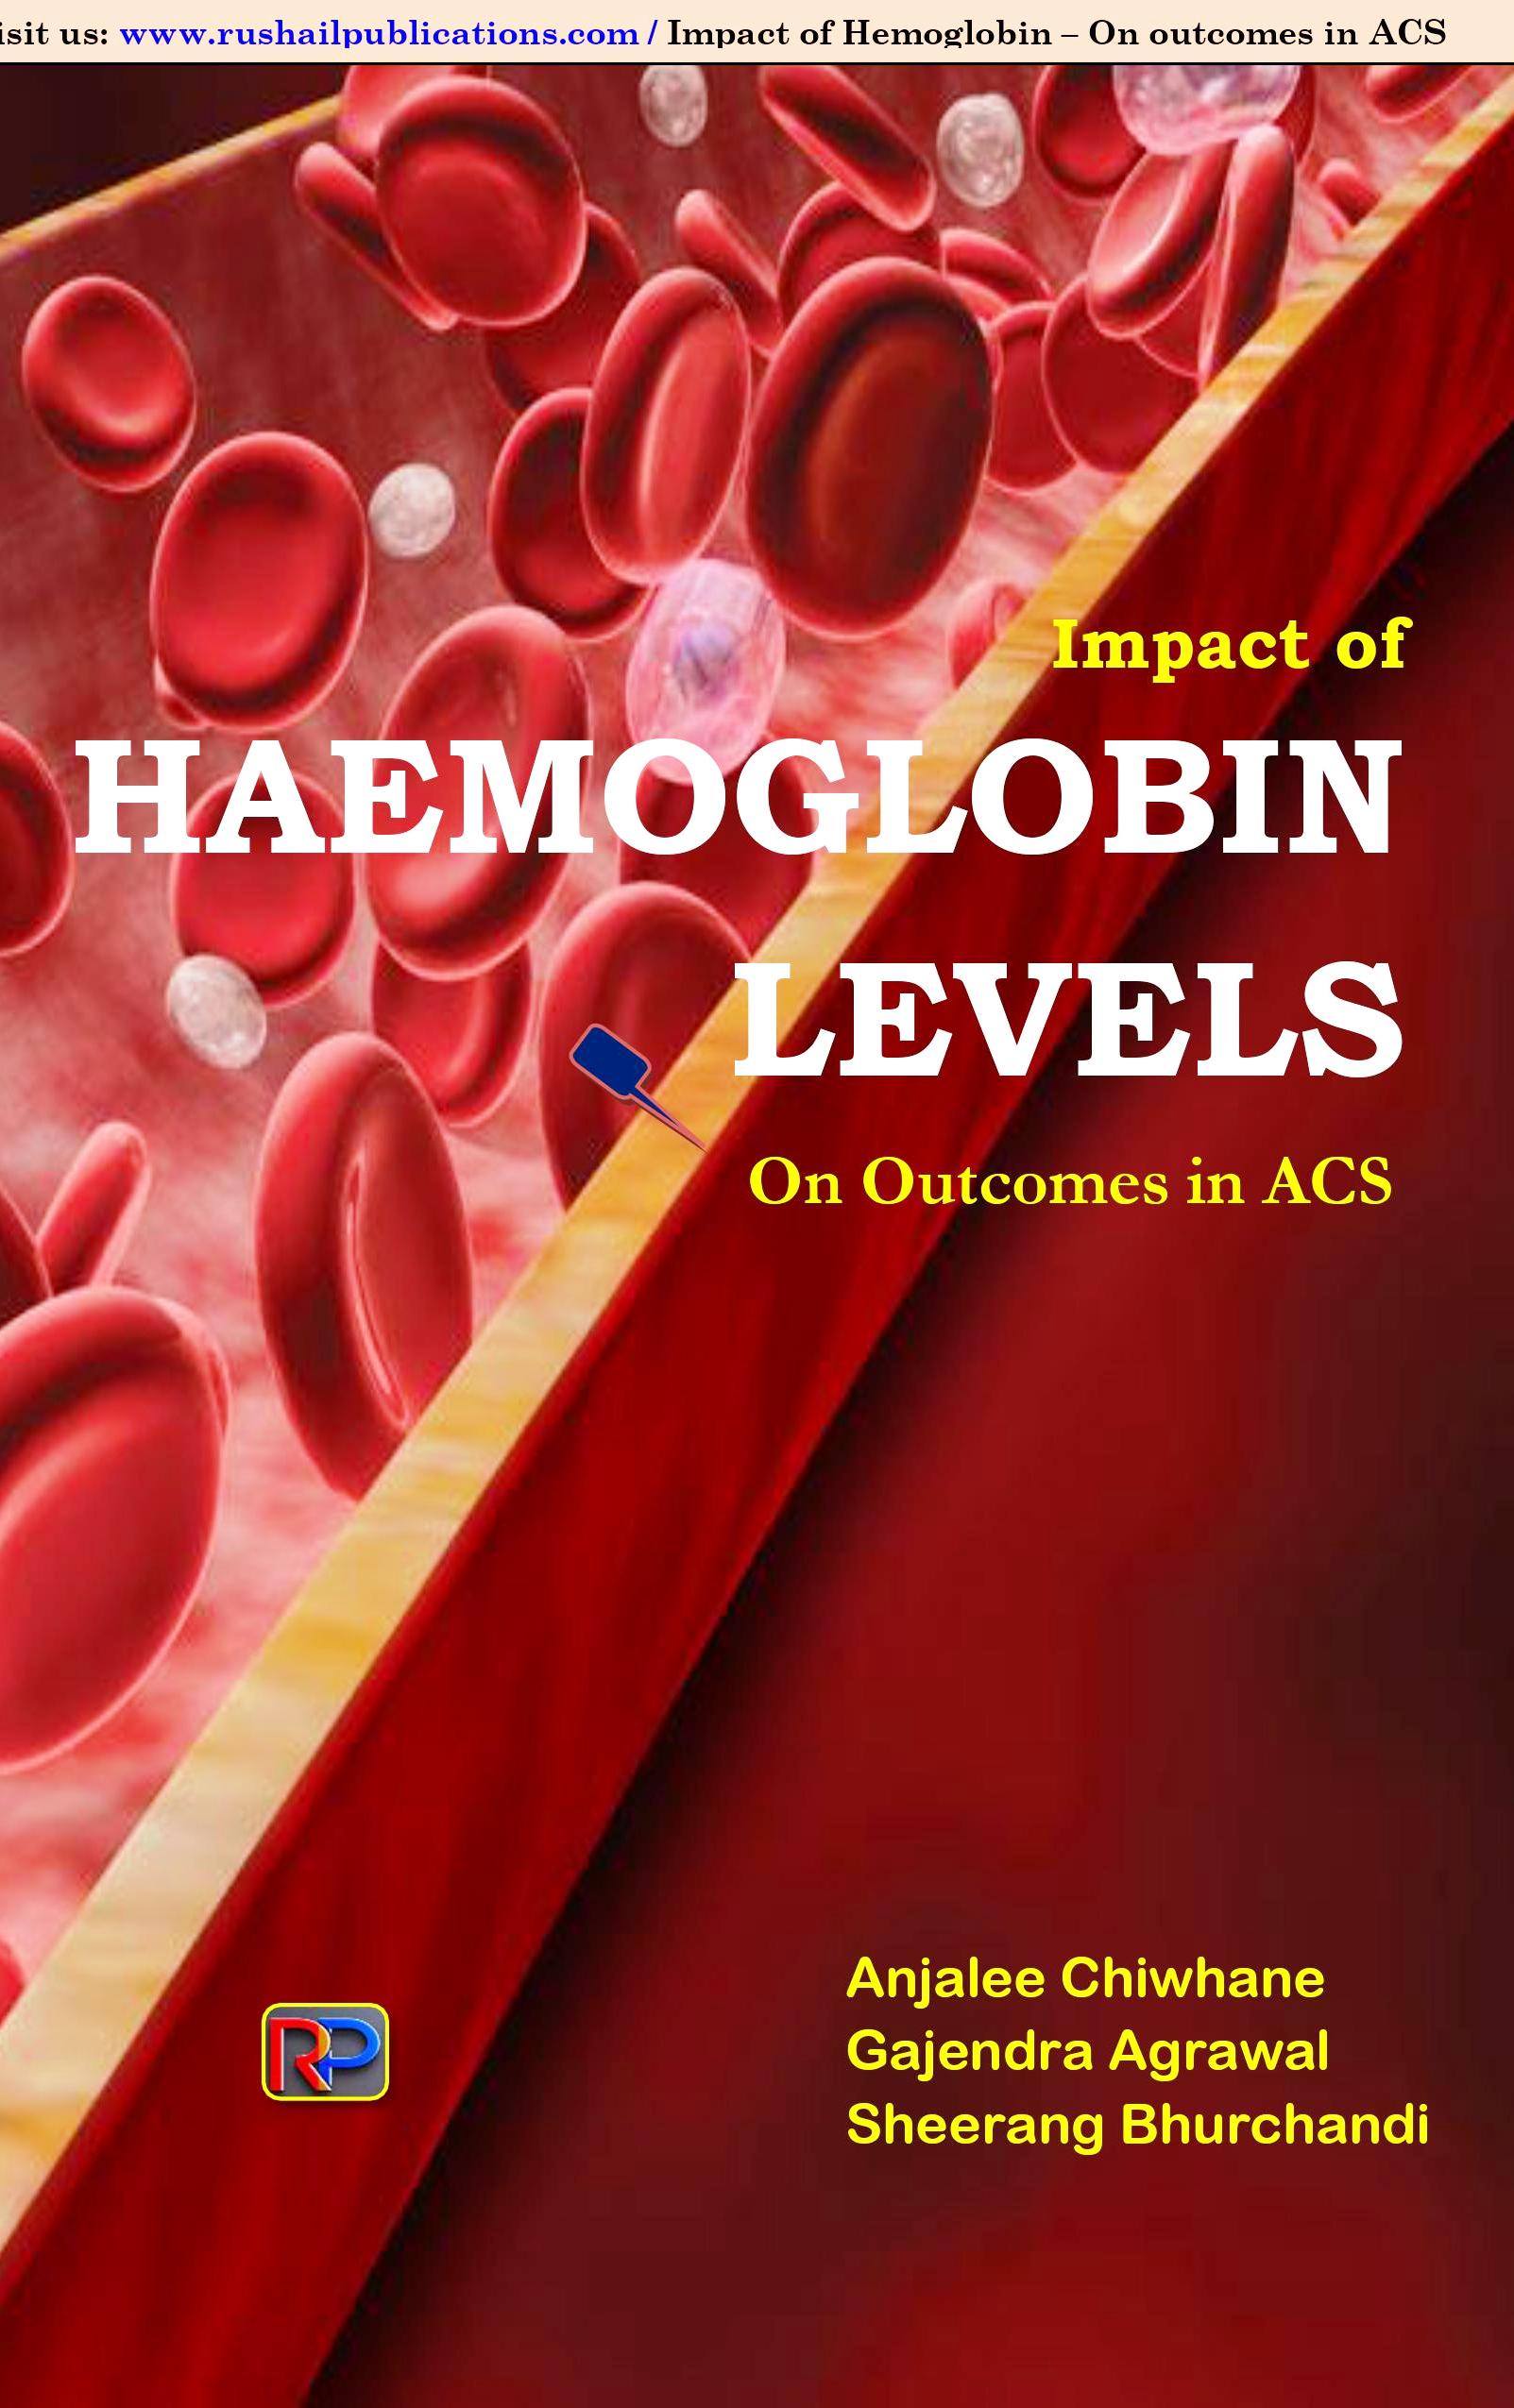 Impact of HEMOGLOBIN LEVELS- On Outcomes in ACS